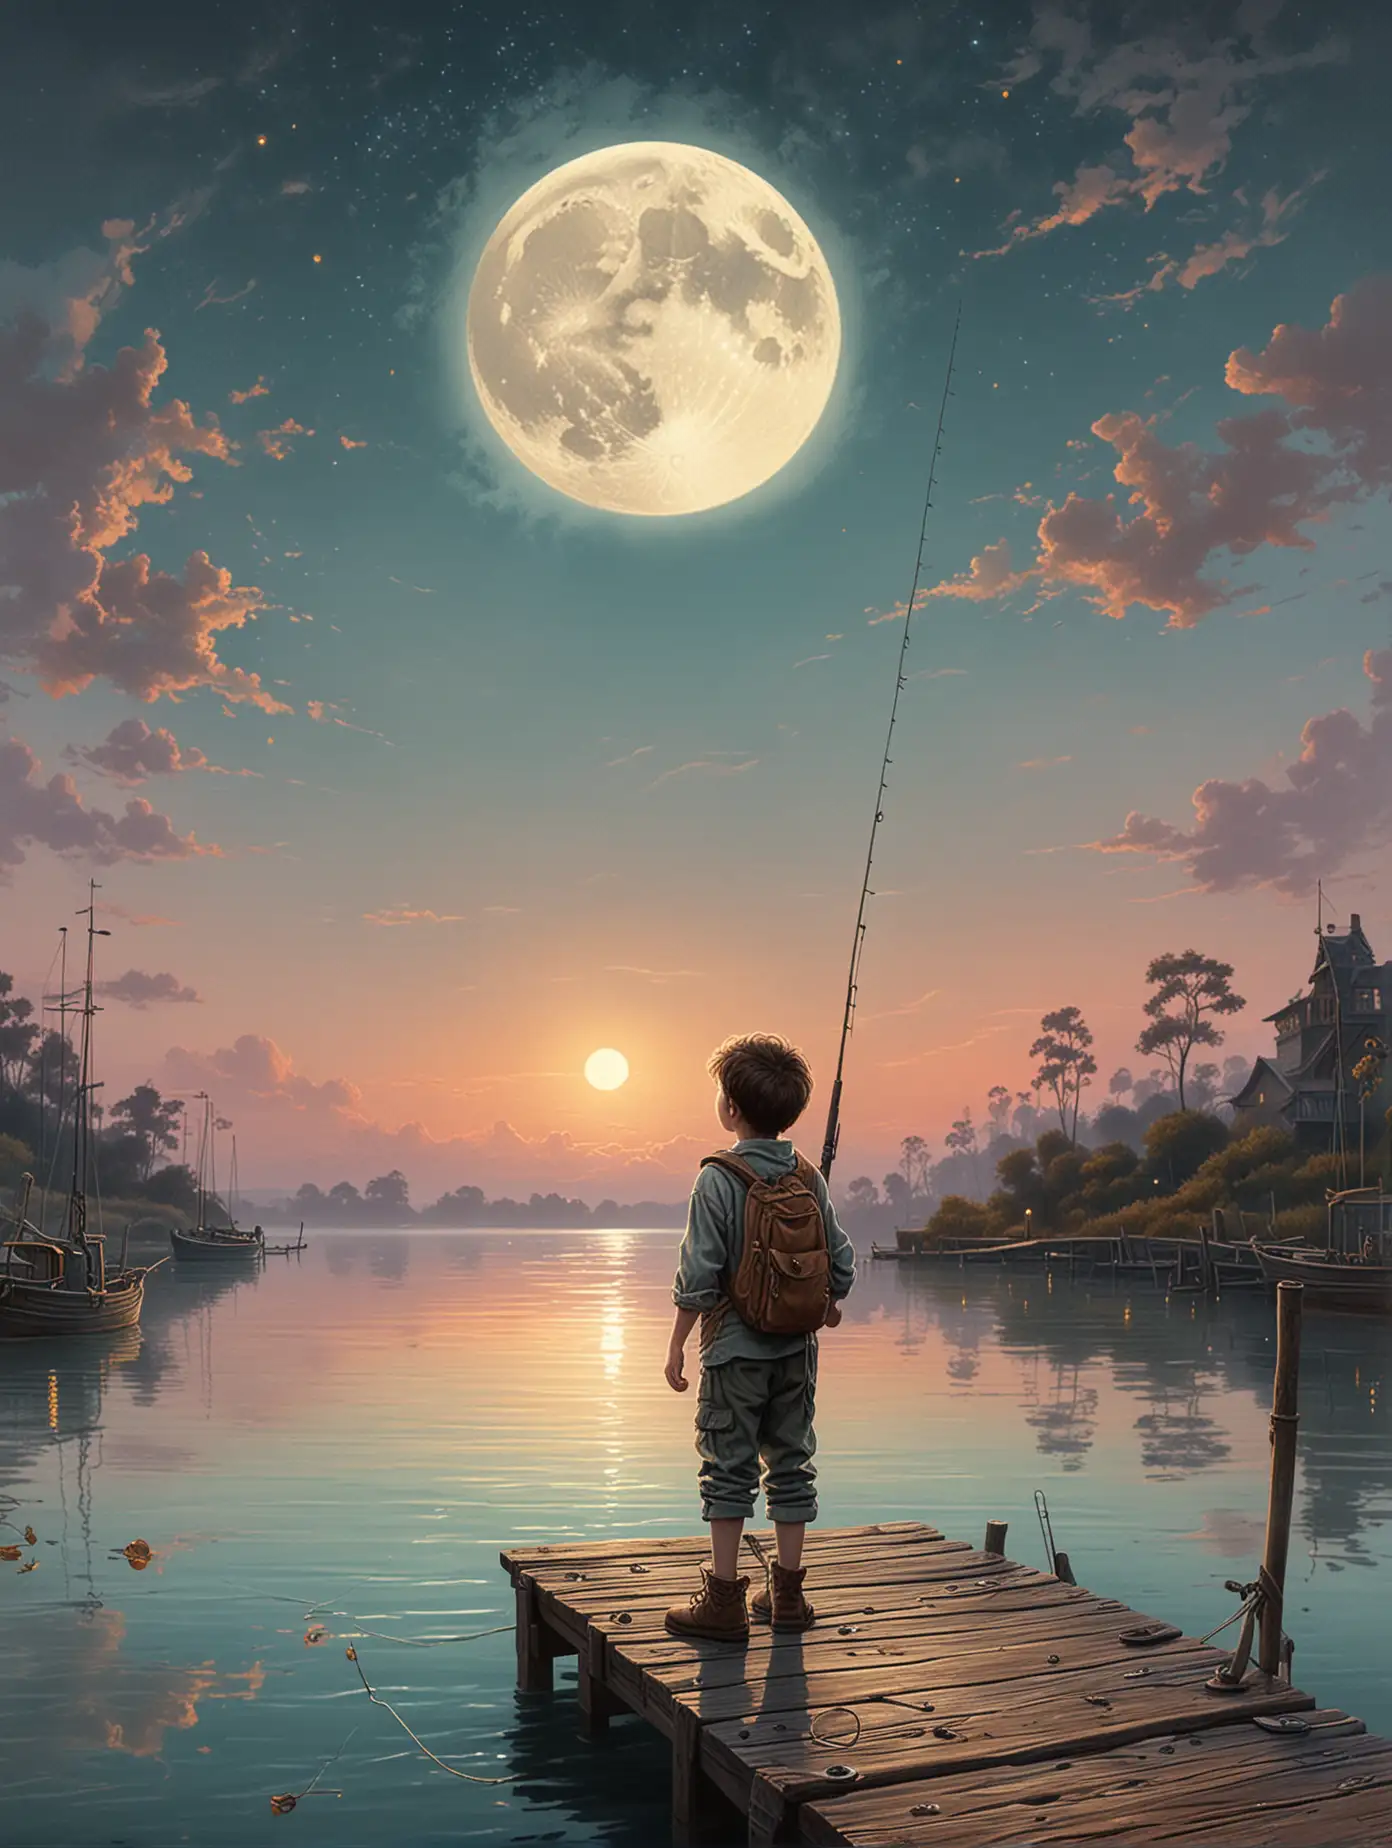 Boy Fishing on Dock with Large Moon in Pastel Tones